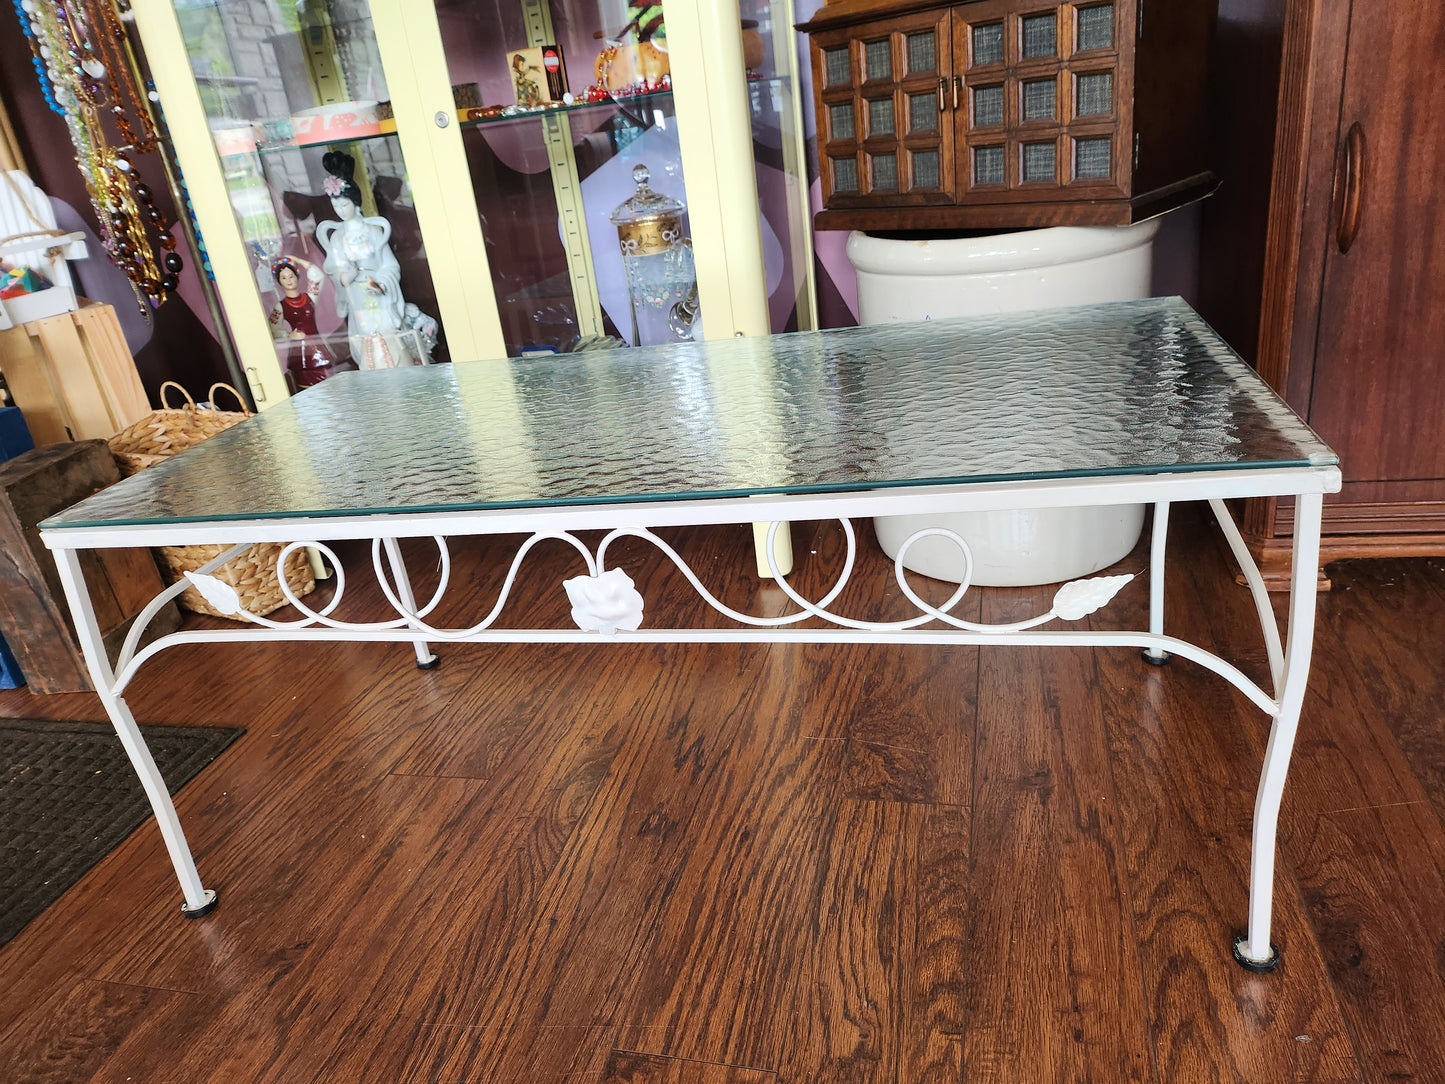 Wrought Iron Patio Coffee Table - Local Pickup Only - In Clarence, NY